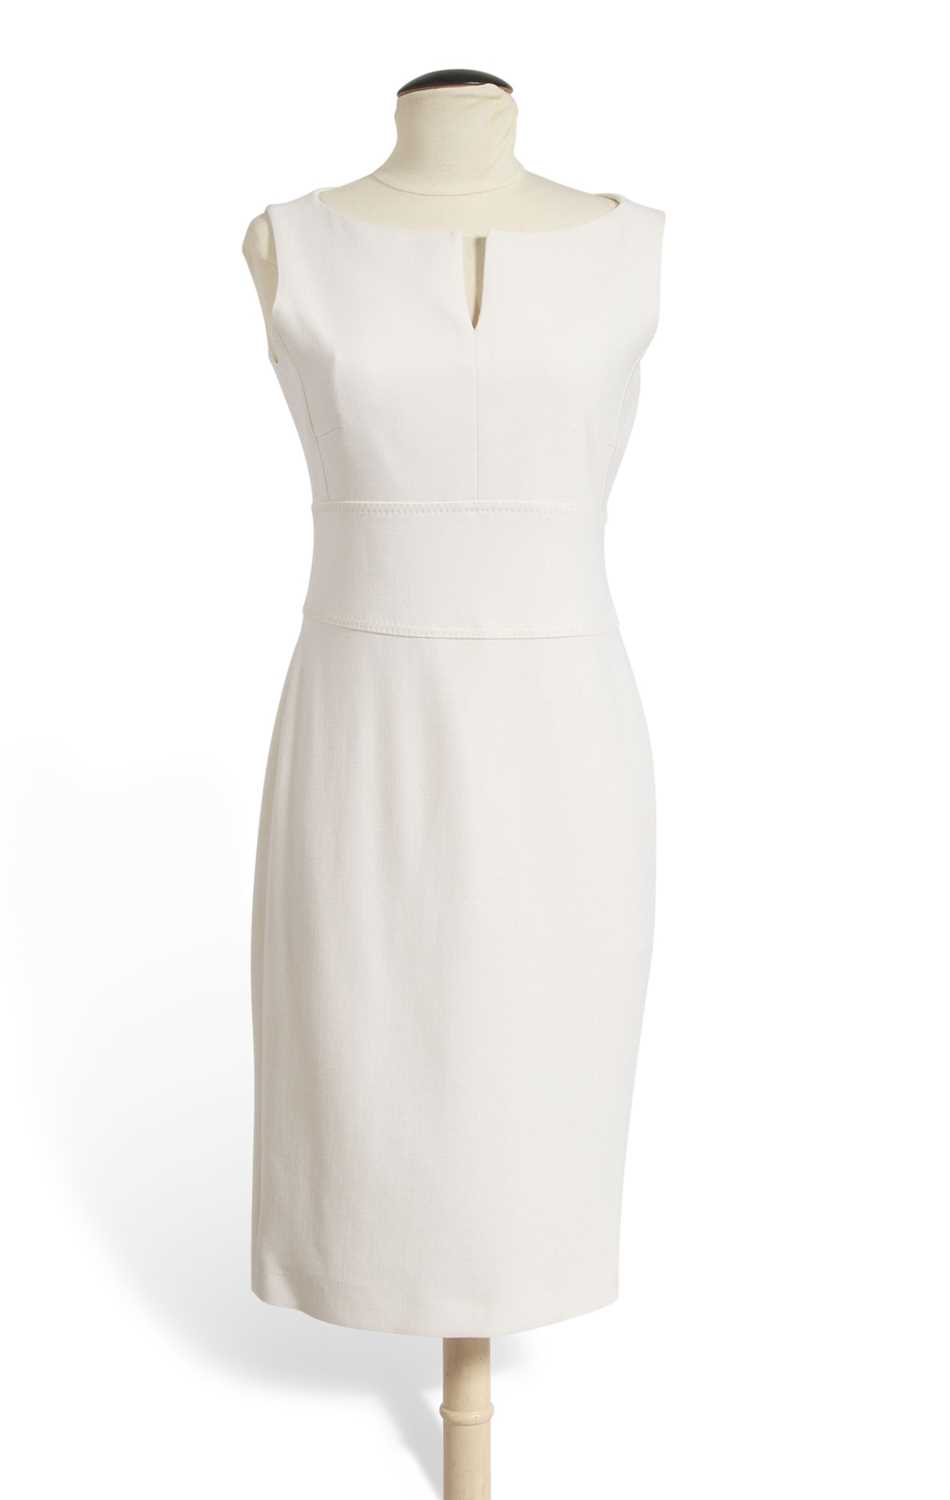 Lot 5005 - Dress worn by Laura Benanti as Melania Trump on The Late Show with Stephen Colbert